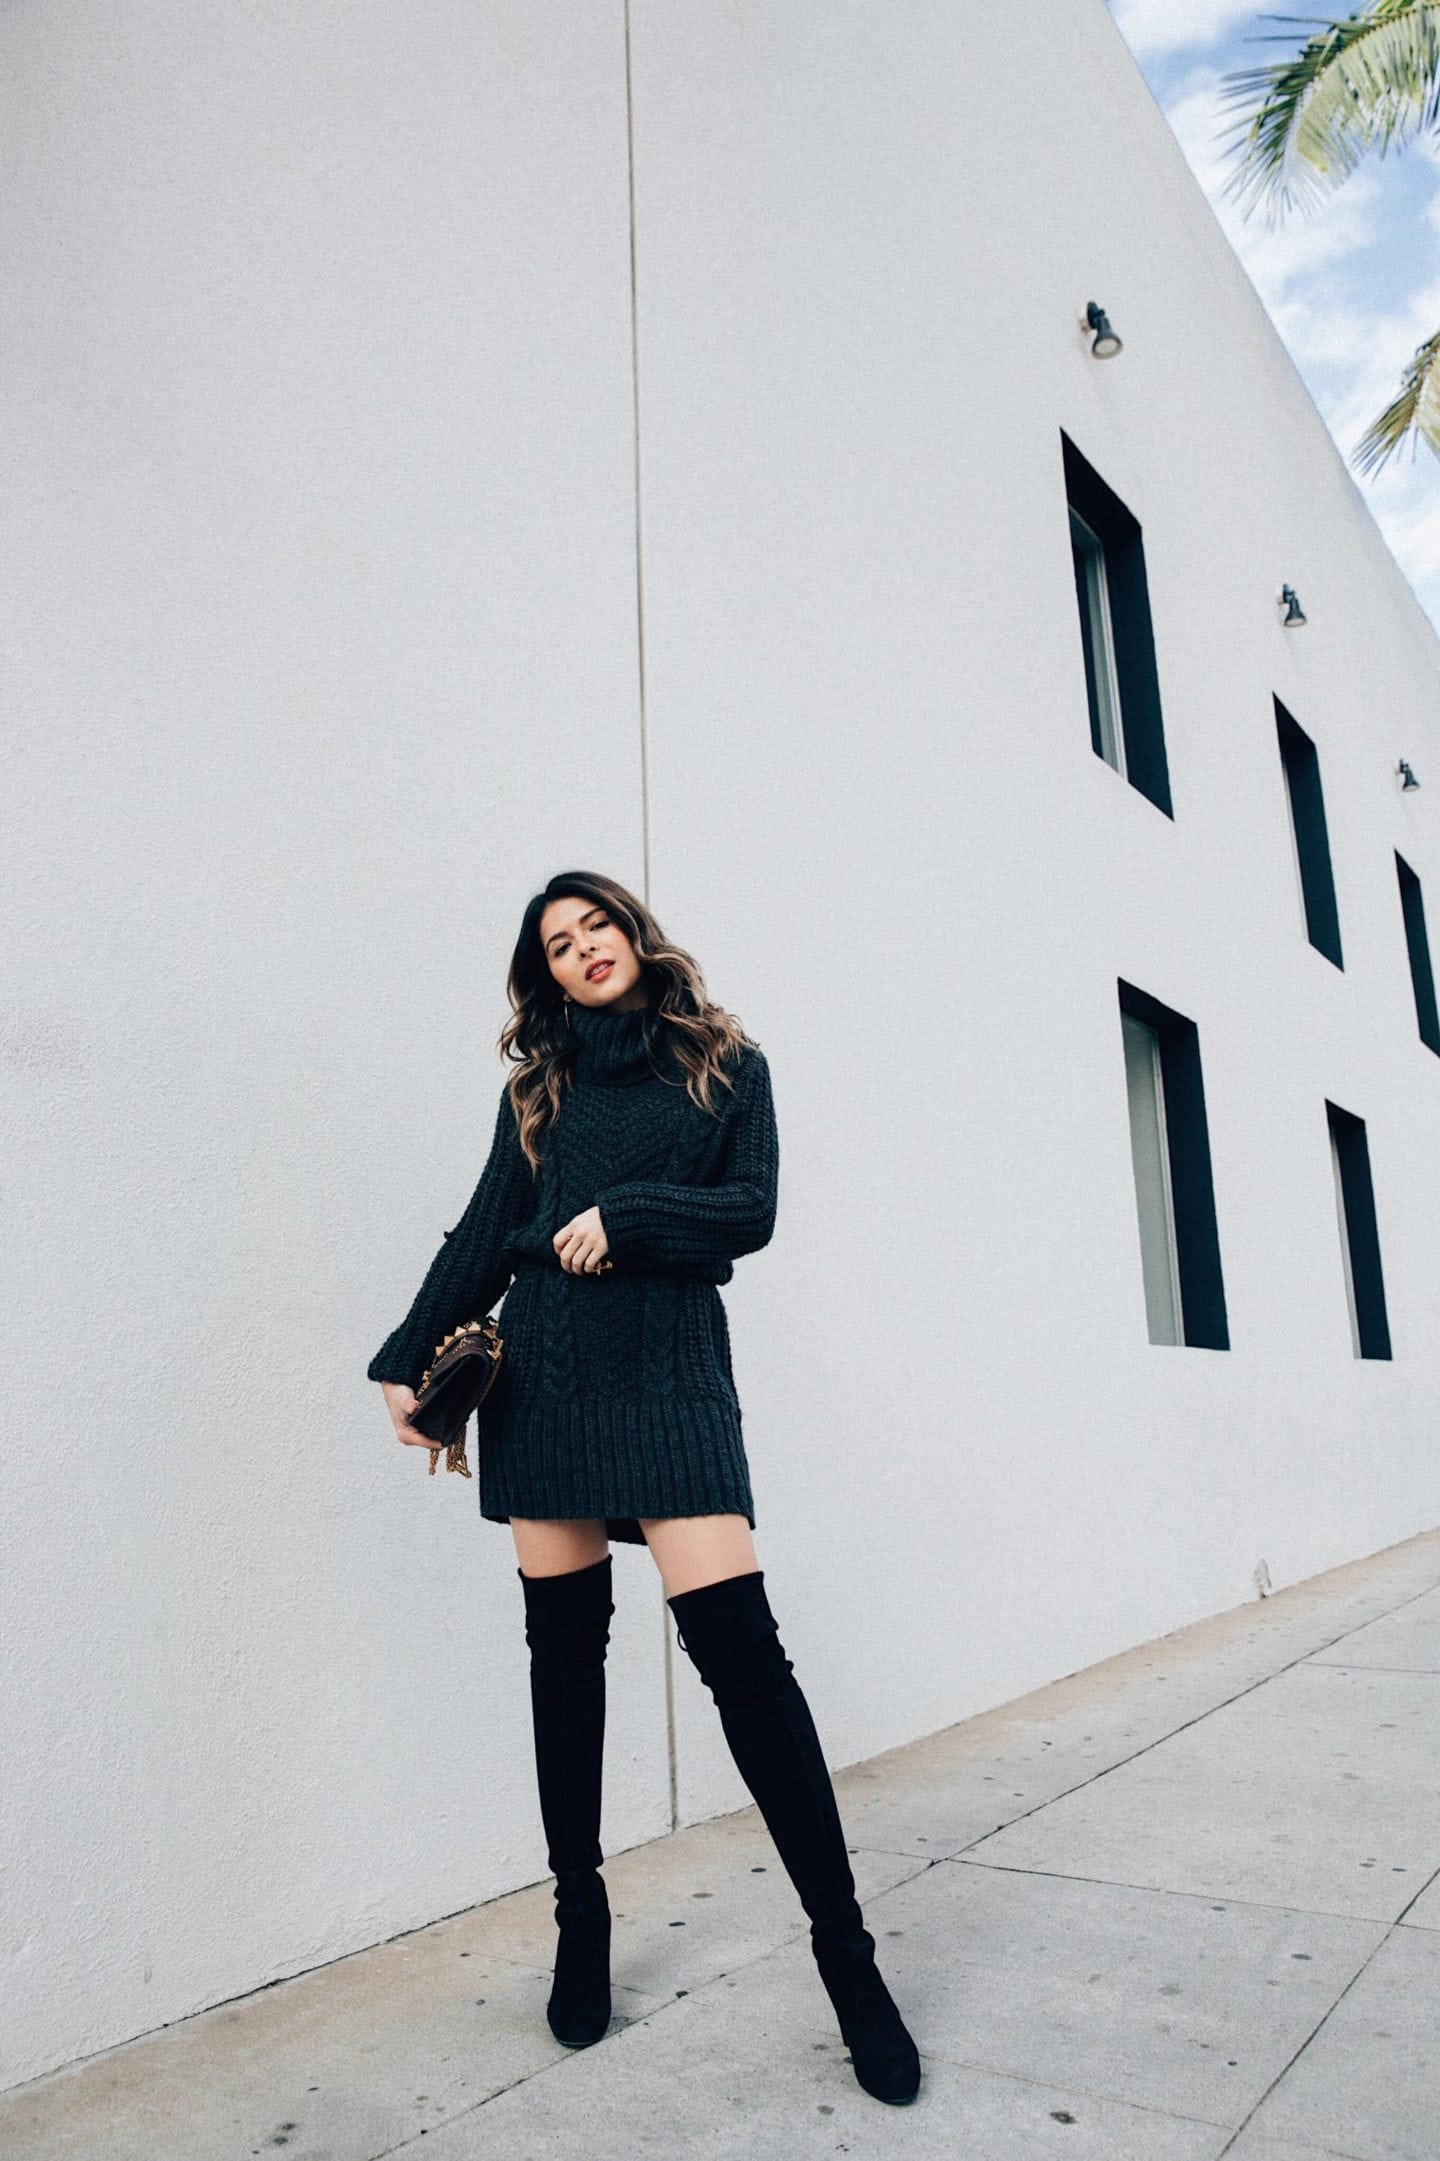 TheGirlFromPanama.com | How to Look Chic in the Winter | Black Sweater Dress with Stuart Weitzman Highland Boots in Los Angeles, CA